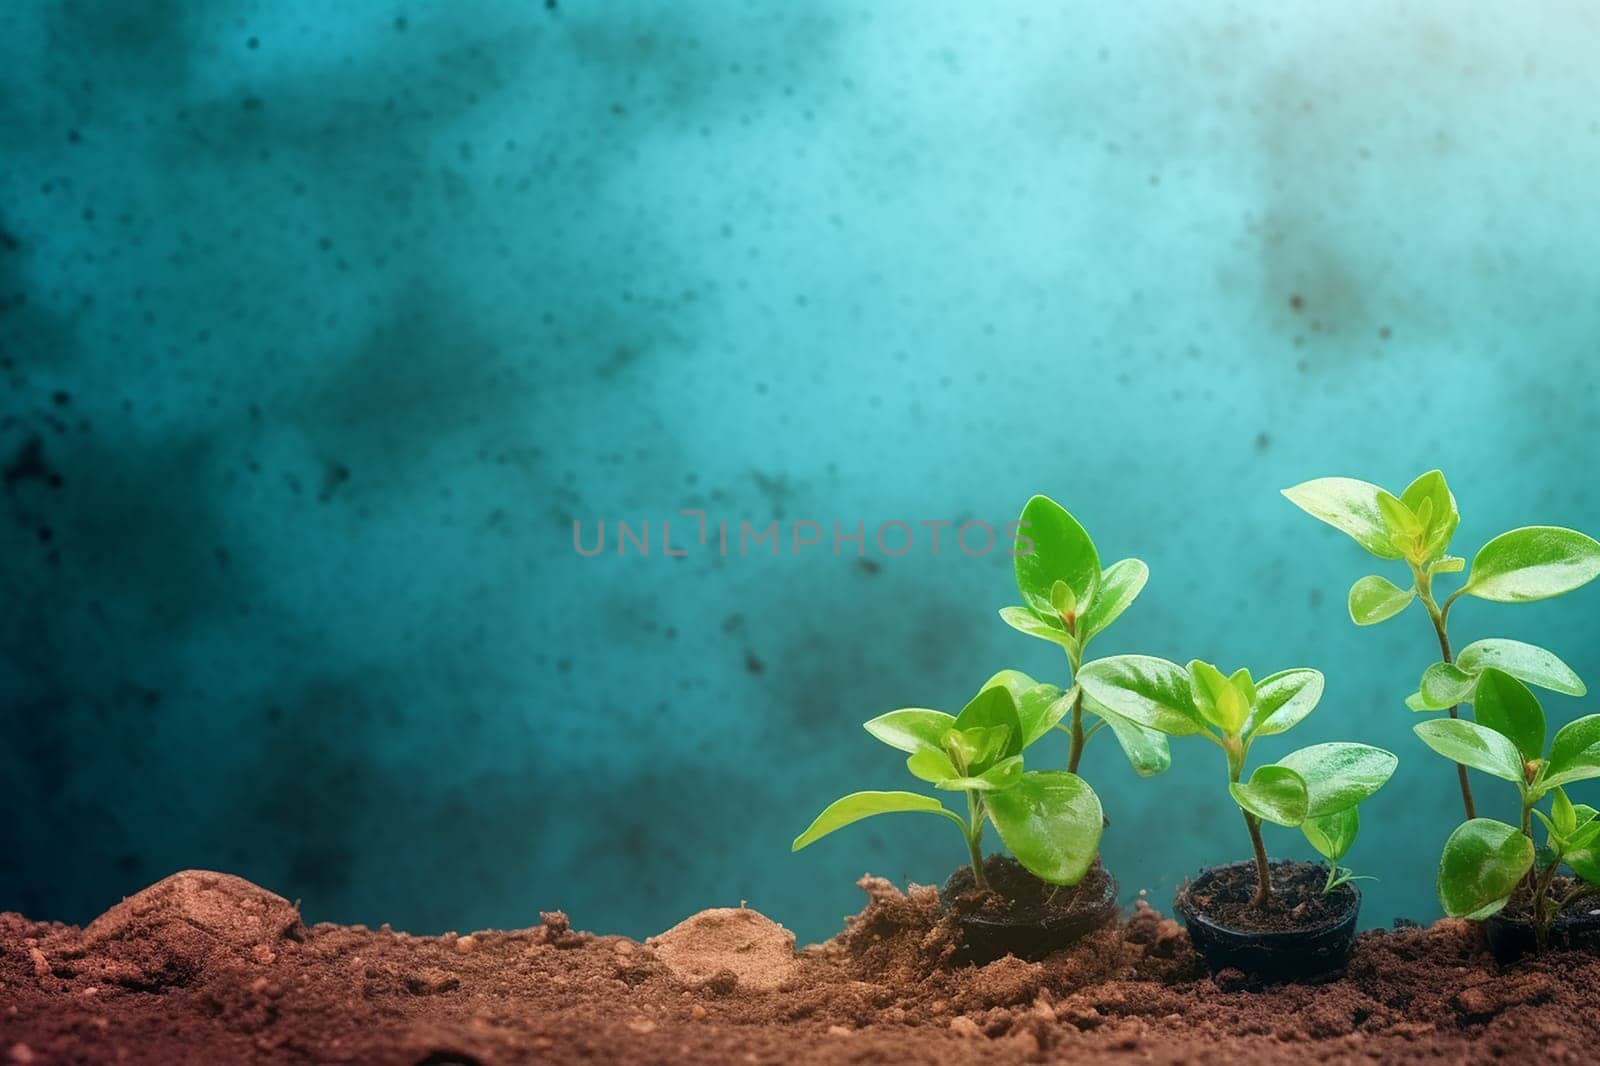 Small plants growing in soil against a blue background. by Hype2art